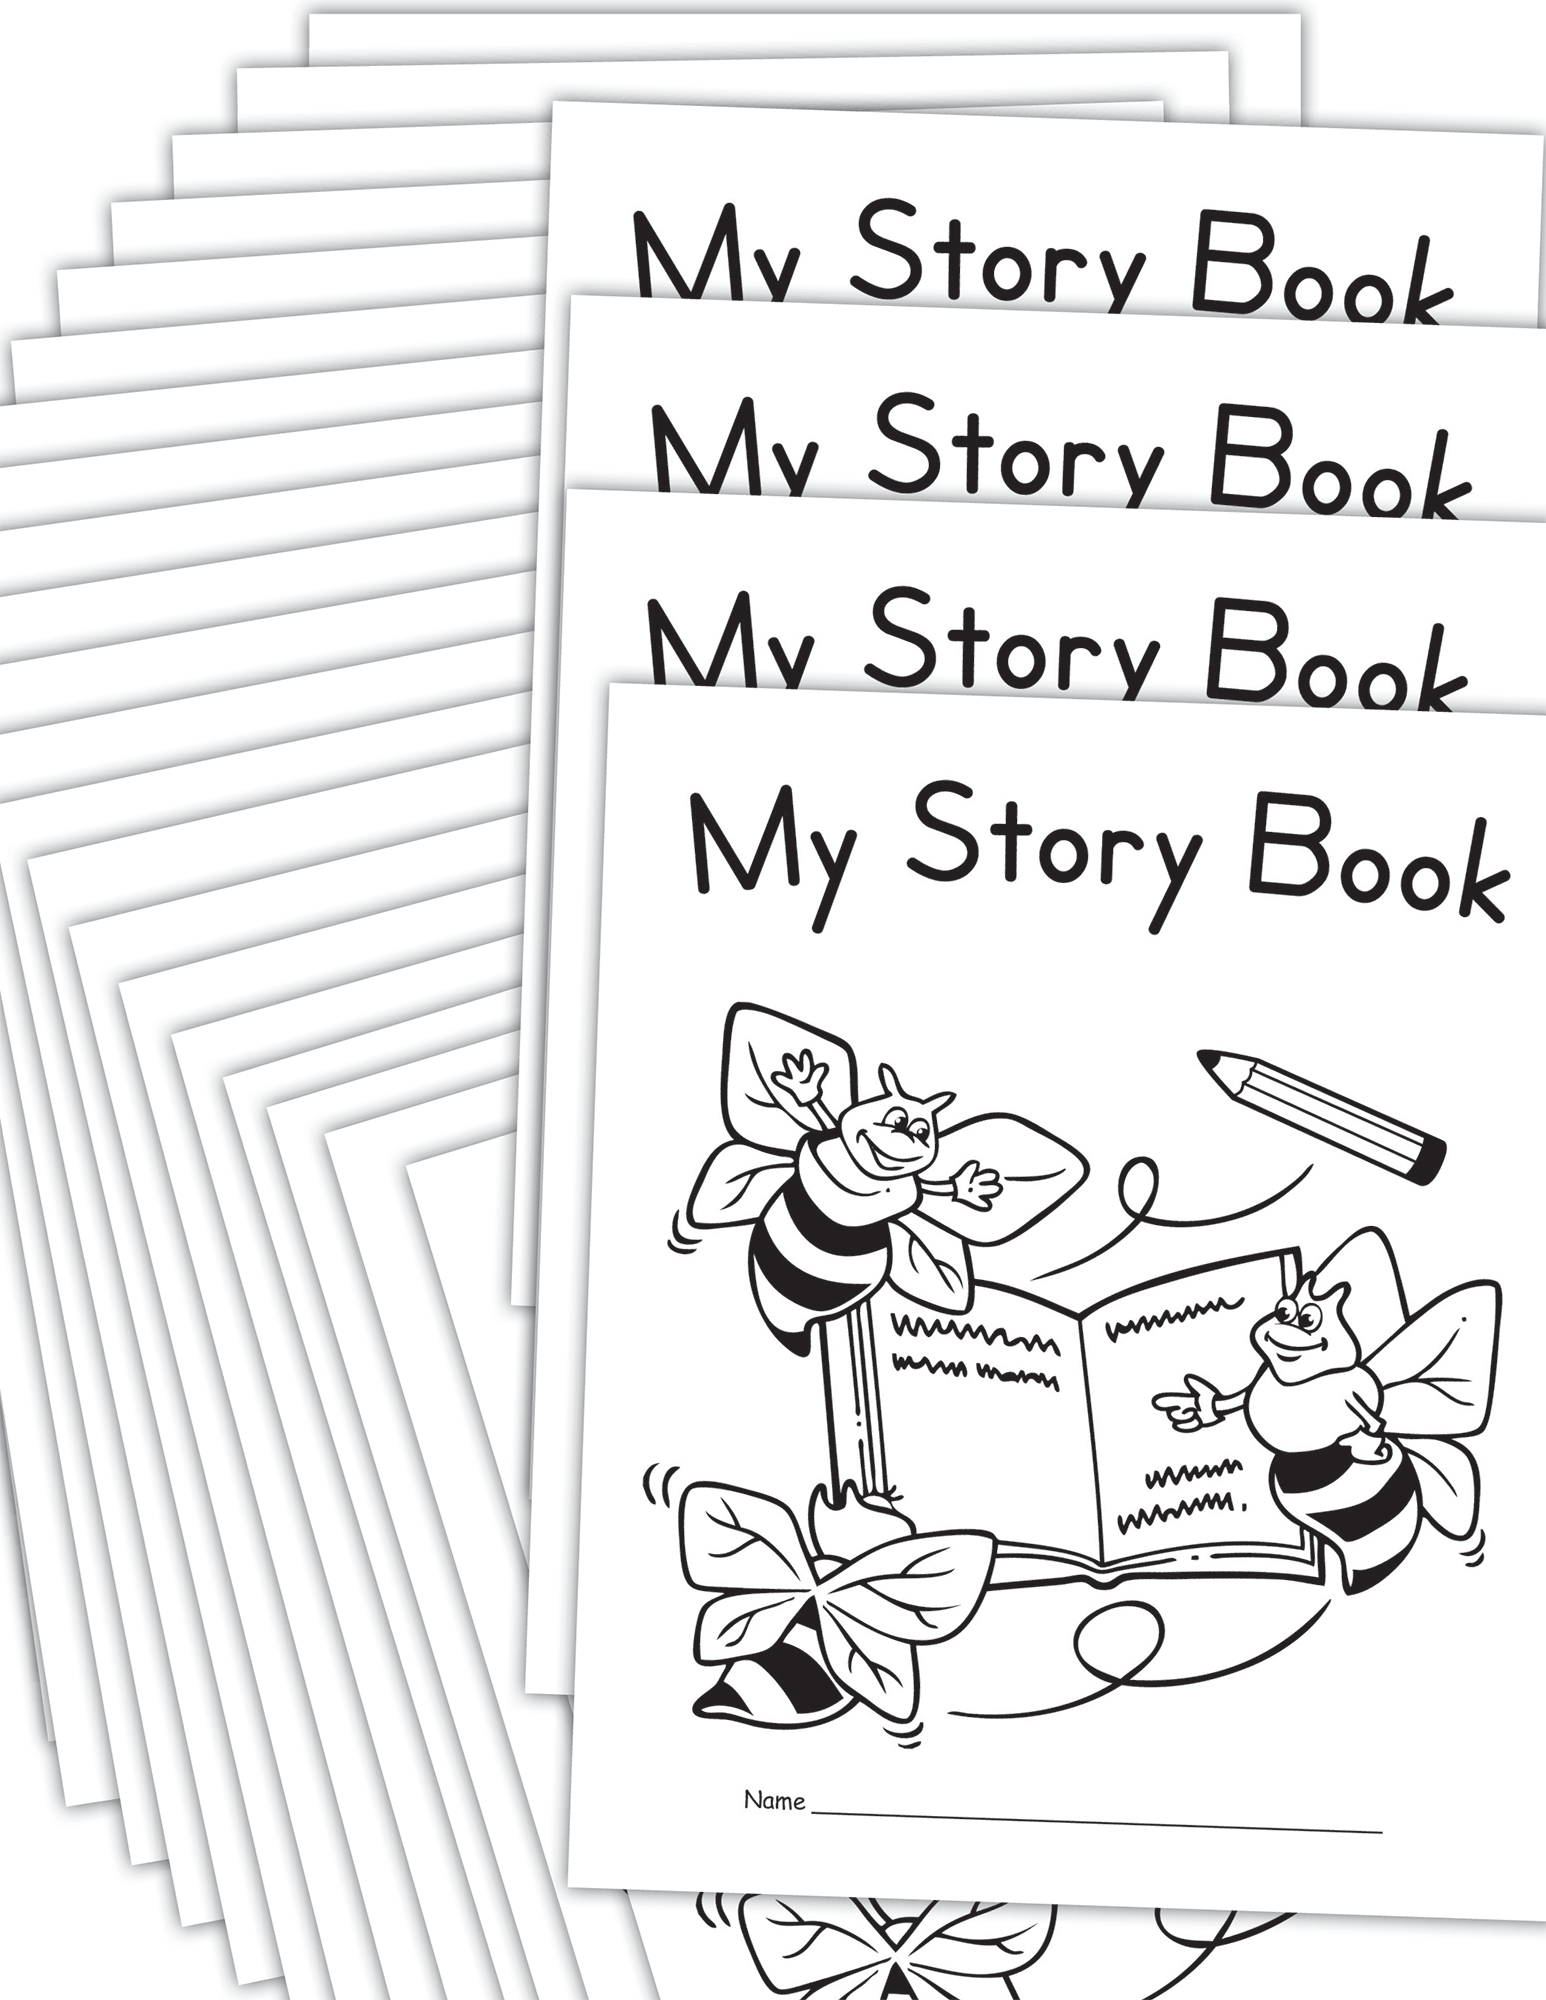 The Teachers' Lounge®  My Storybook Blank Book - 5.5 x 8.5 - Pack of 24